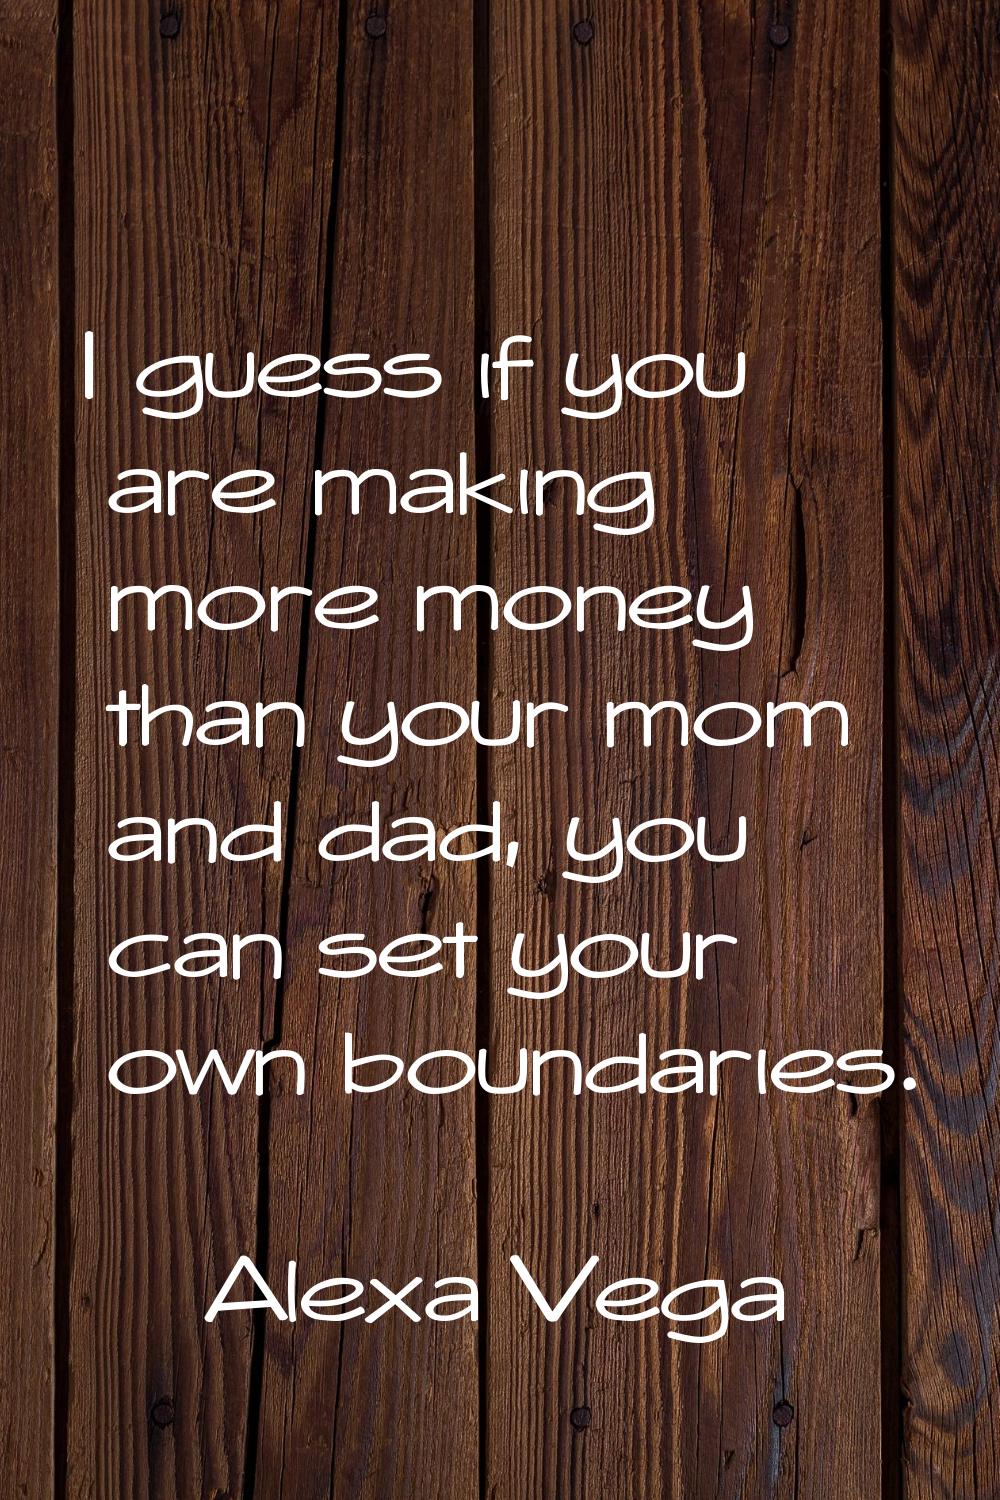 I guess if you are making more money than your mom and dad, you can set your own boundaries.